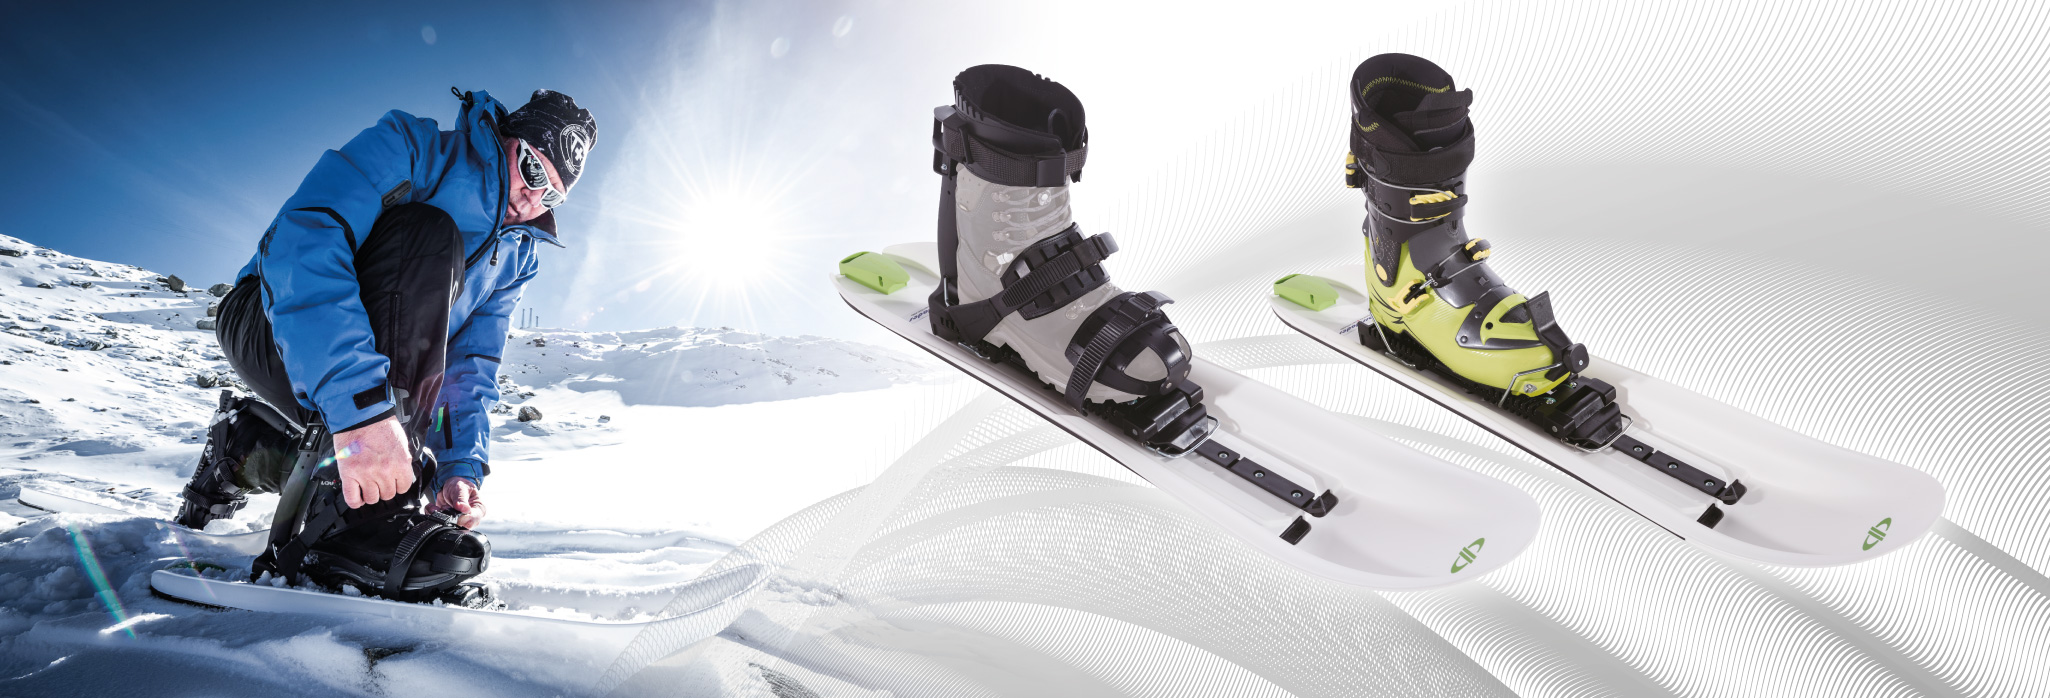 compatible with both a soft boot (snowboard) and hard boot (ski)